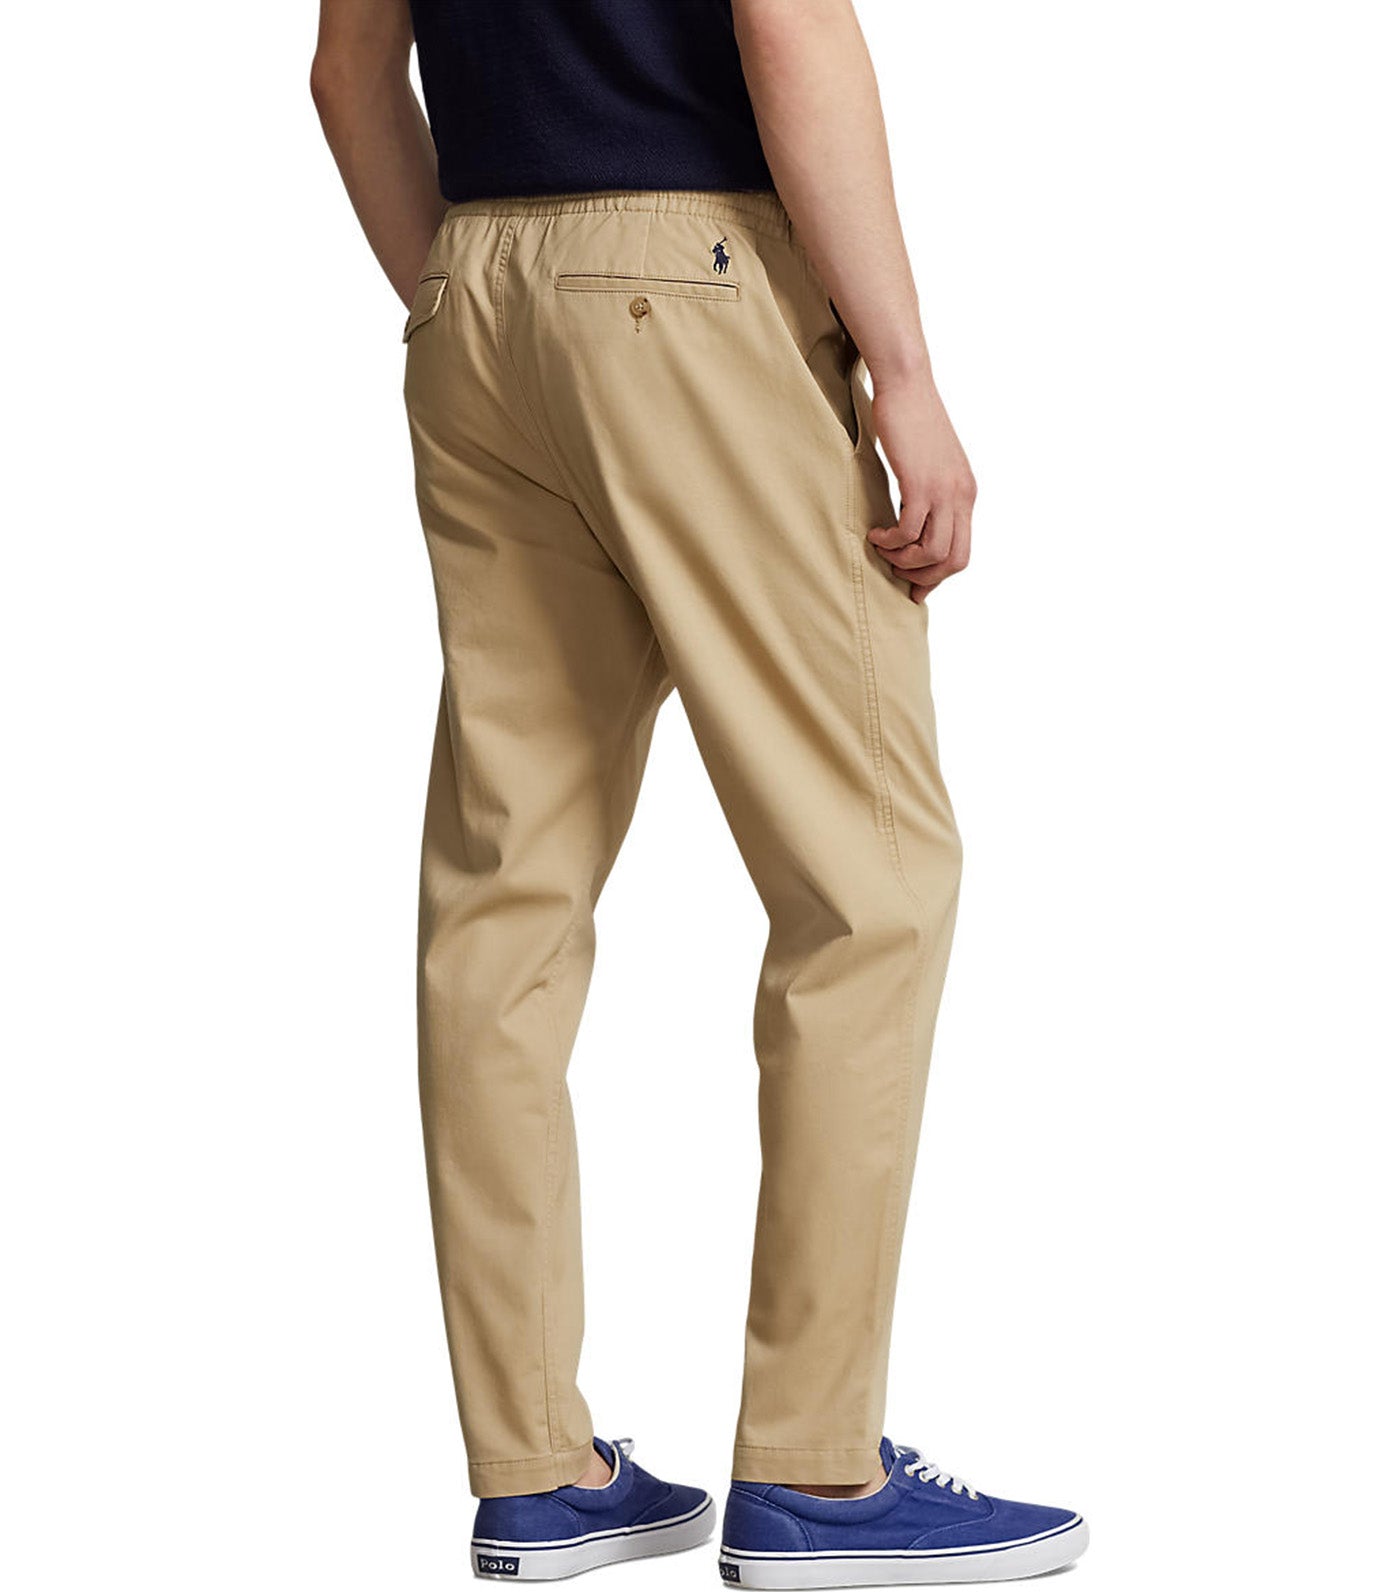 Polo Ralph Lauren Men's Polo Prepster Classic Fit Chino Pants